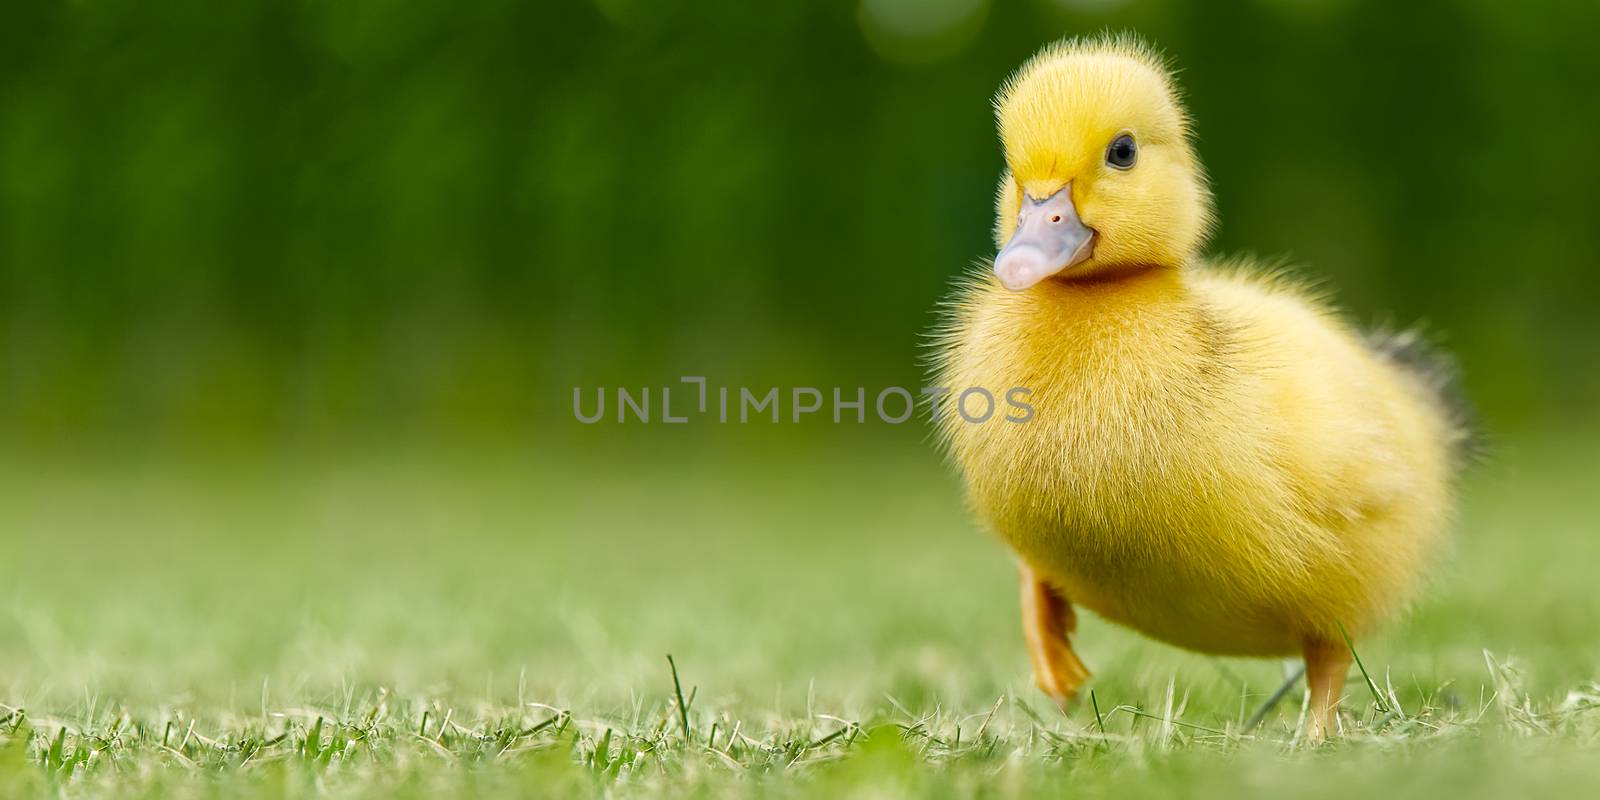 Small newborn ducklings walking on backyard on green grass. Yellow cute duckling running on meadow field in sunny day. Banner or panoramic shot with duck chick on grass. by PhotoTime